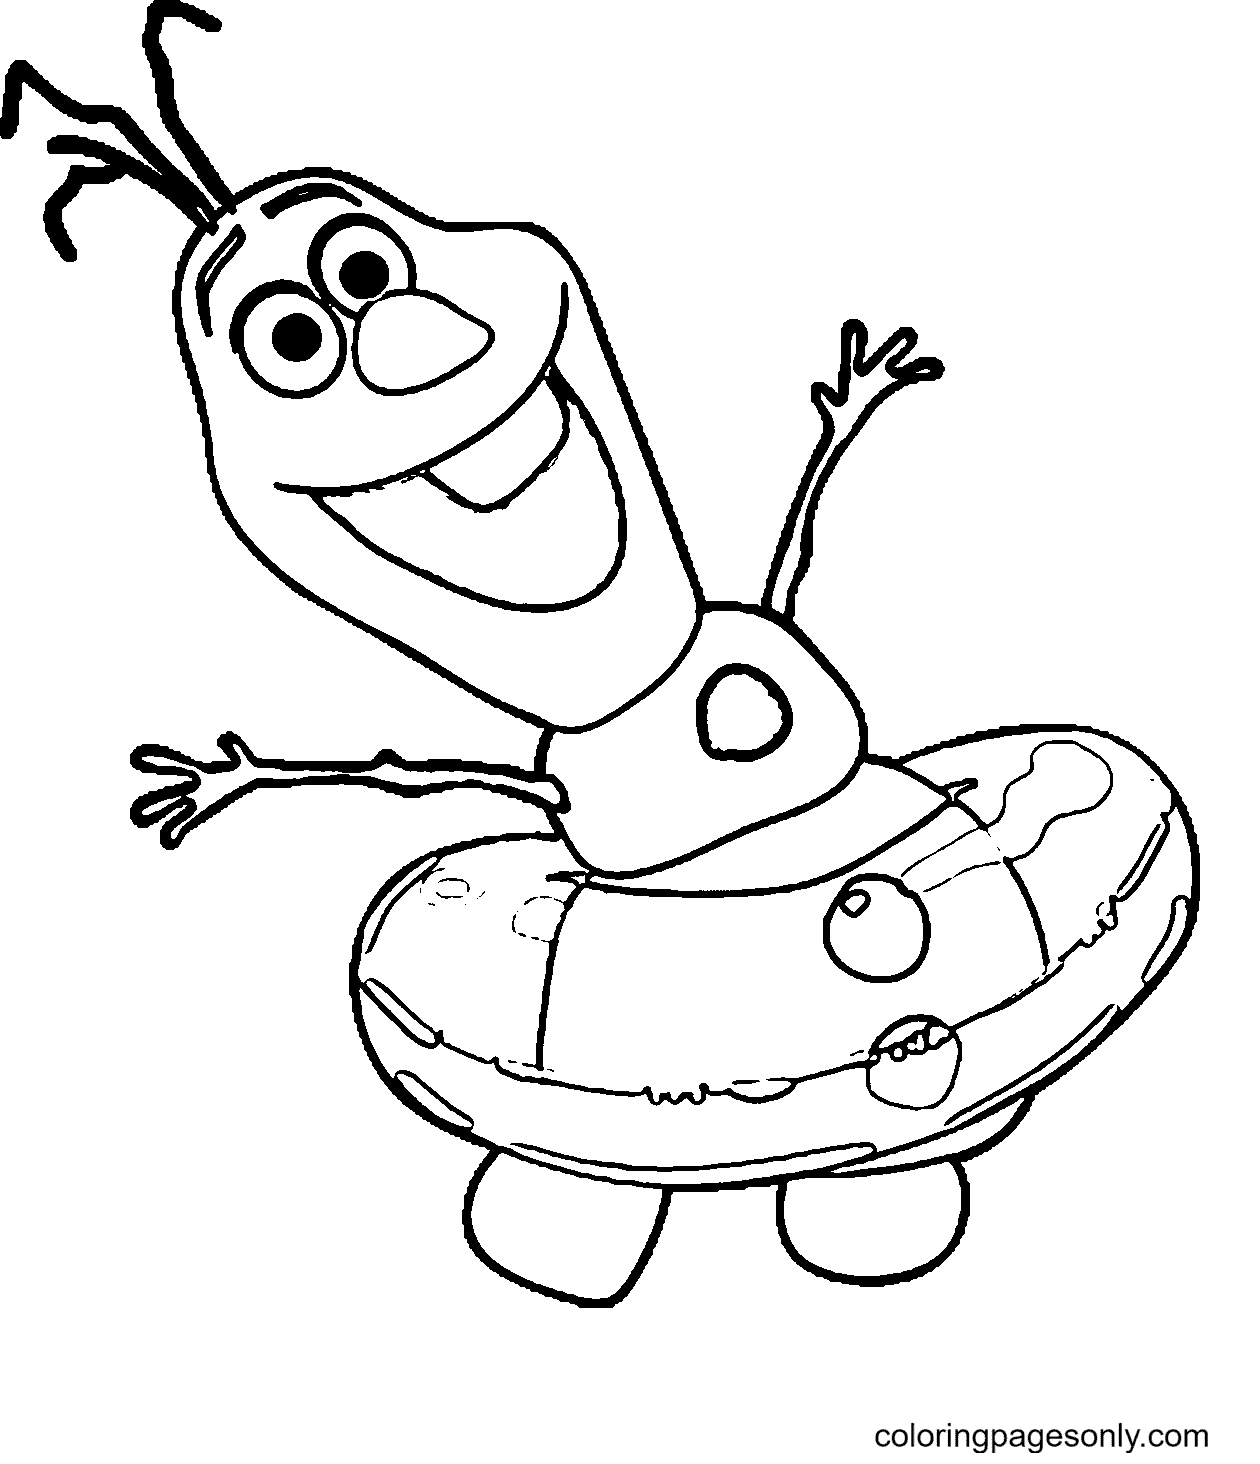 Olaf Summer Swimming Coloring Pages